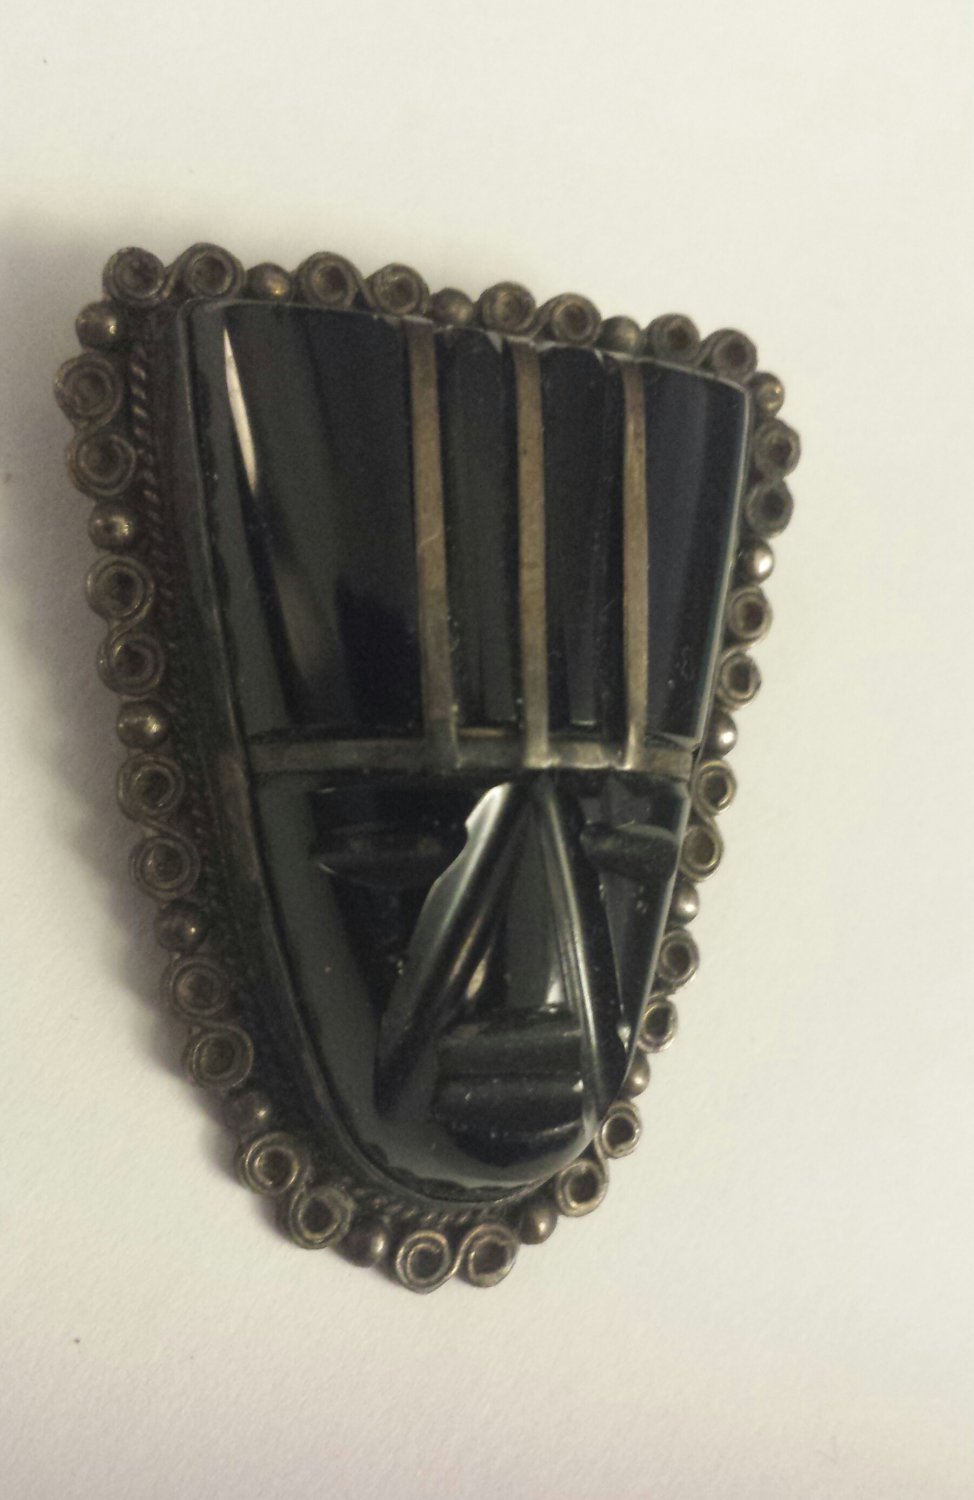 Vintage 1950s Mexico Sterling Silver Carved Onyx Mayan Aztec Tribal Face Mask Pin Brooch